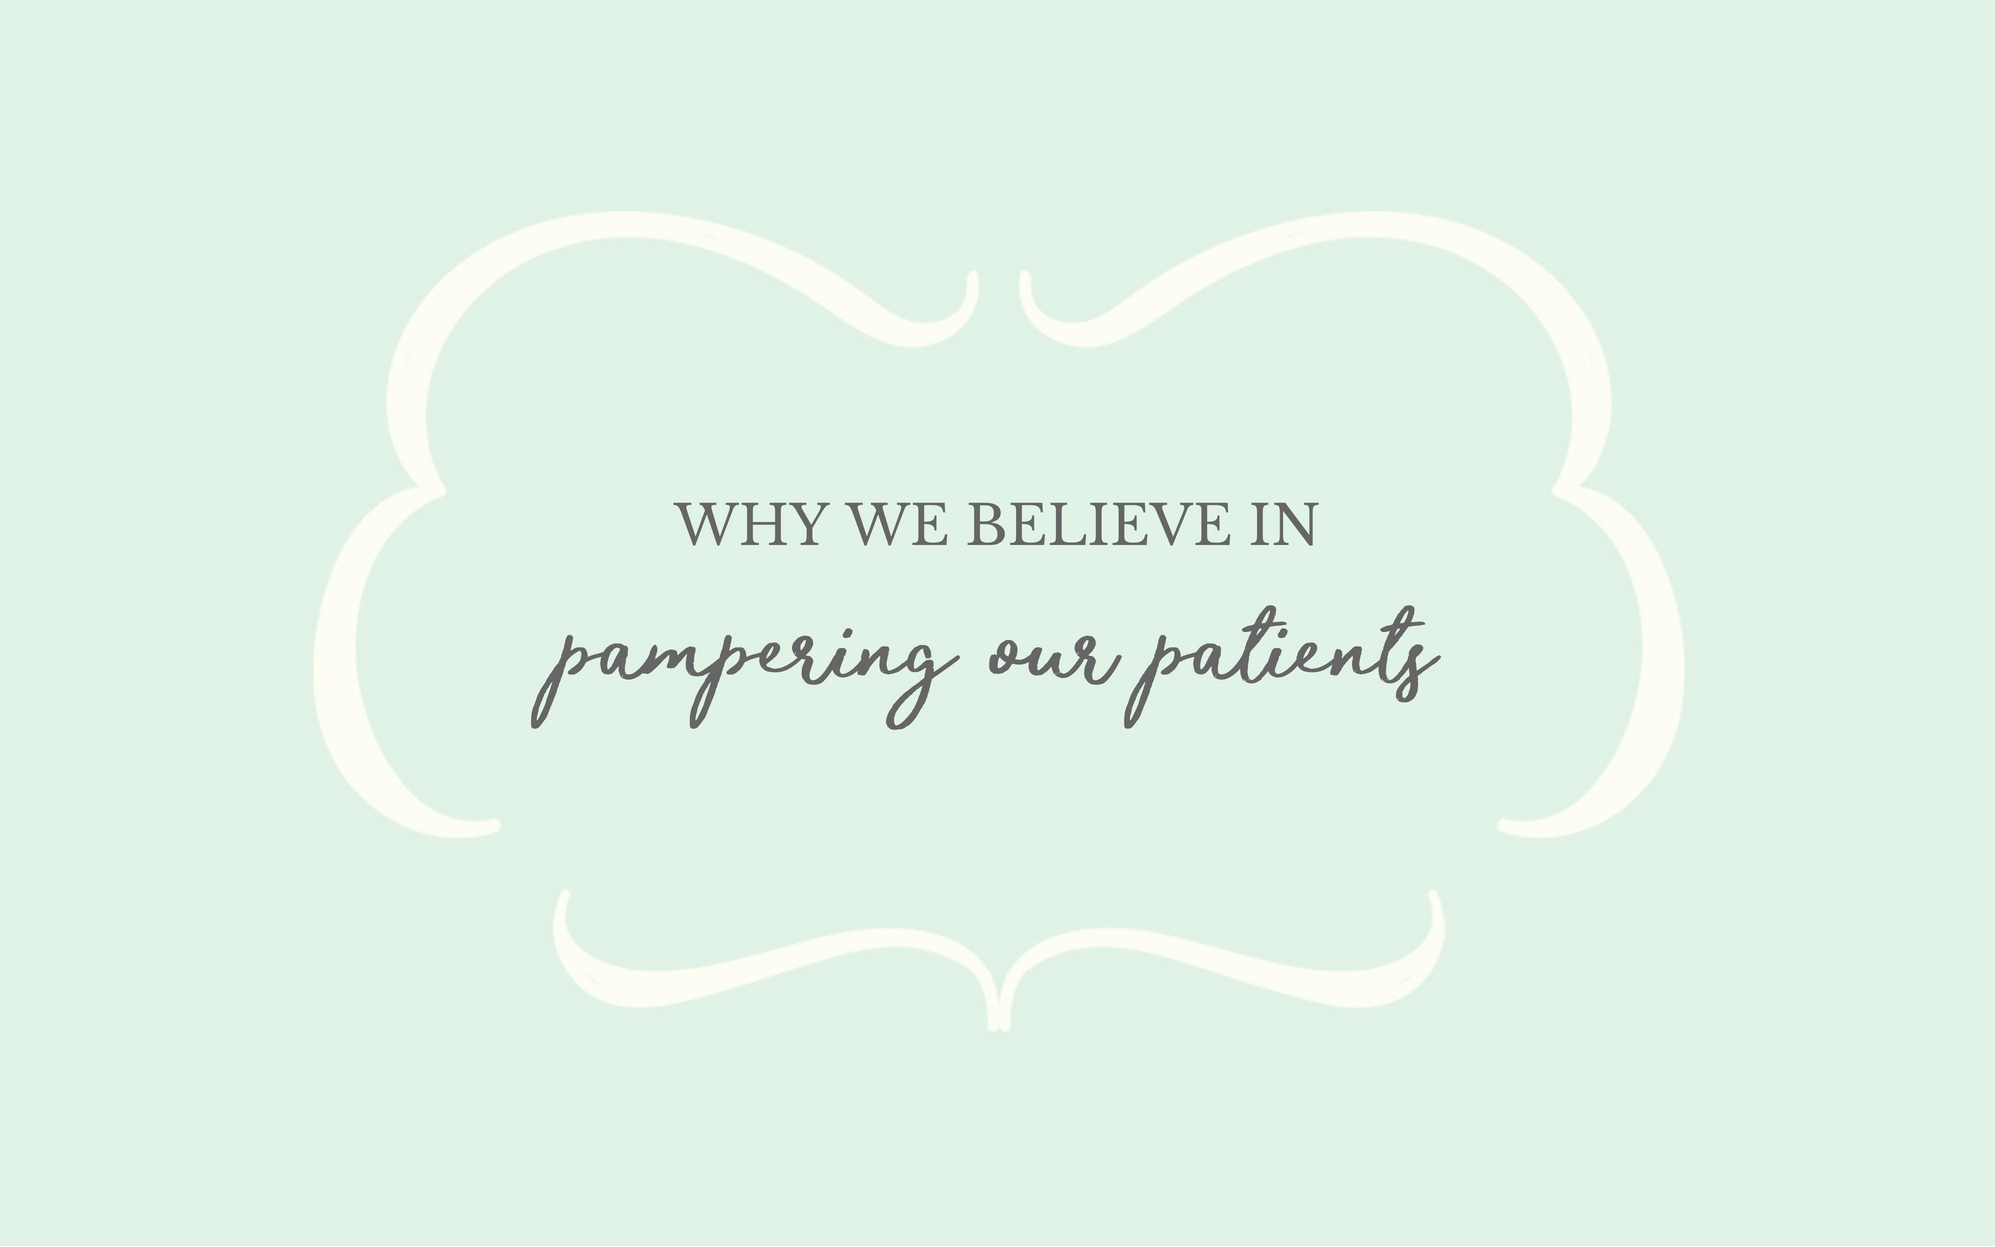 Why We Believe in Pampering Our Patients!